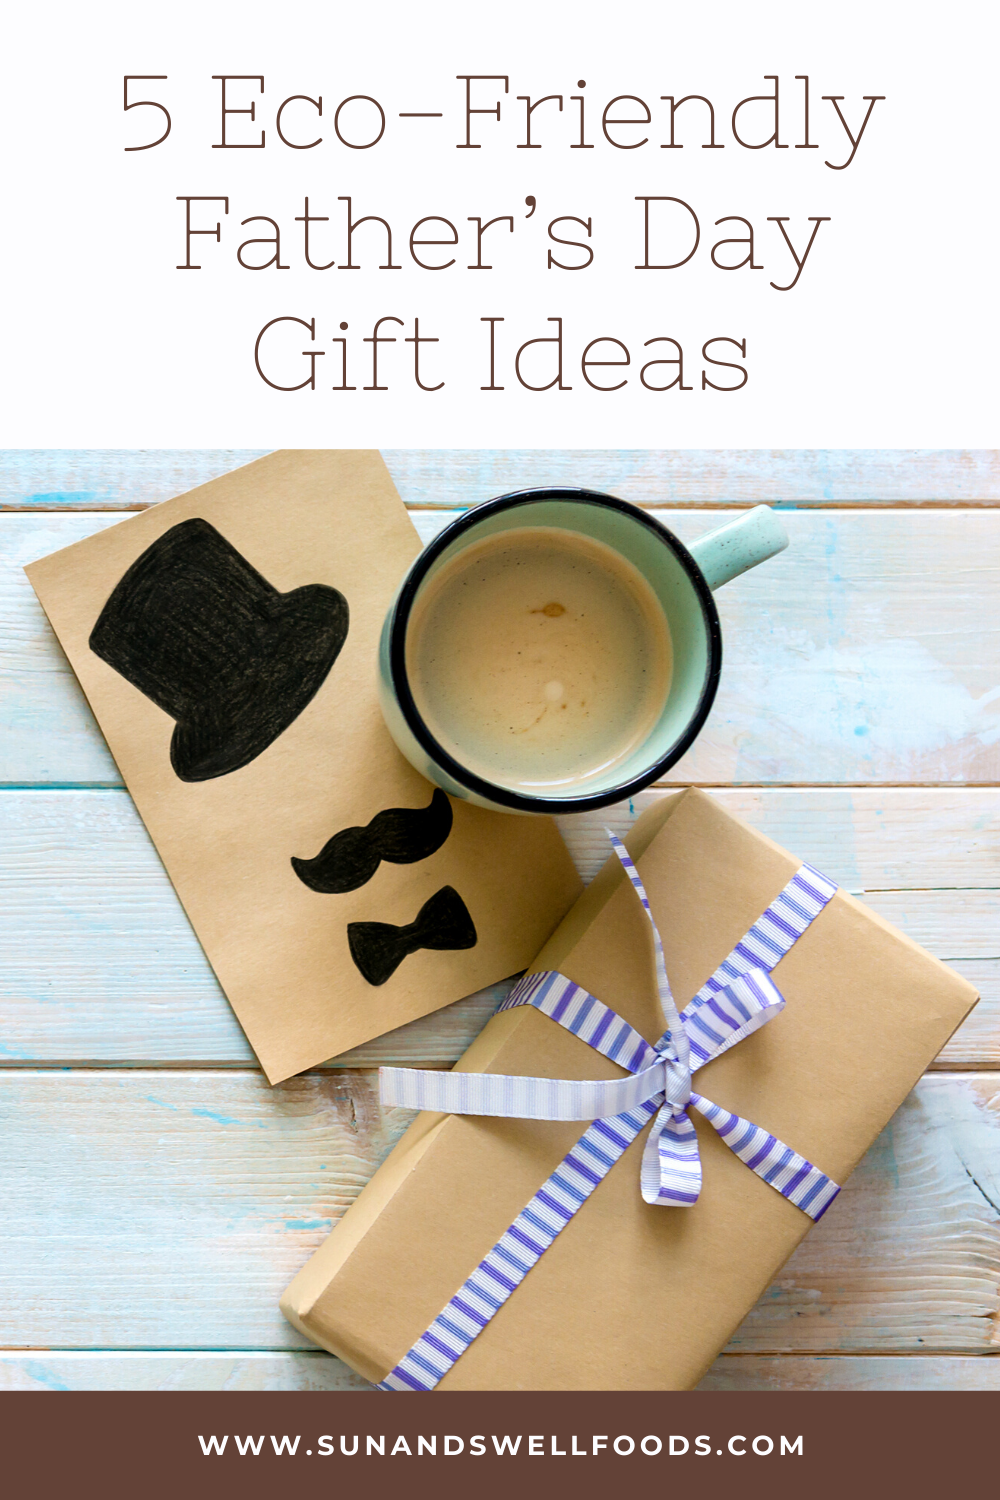 Eco-Friendly Father's Day Gifts